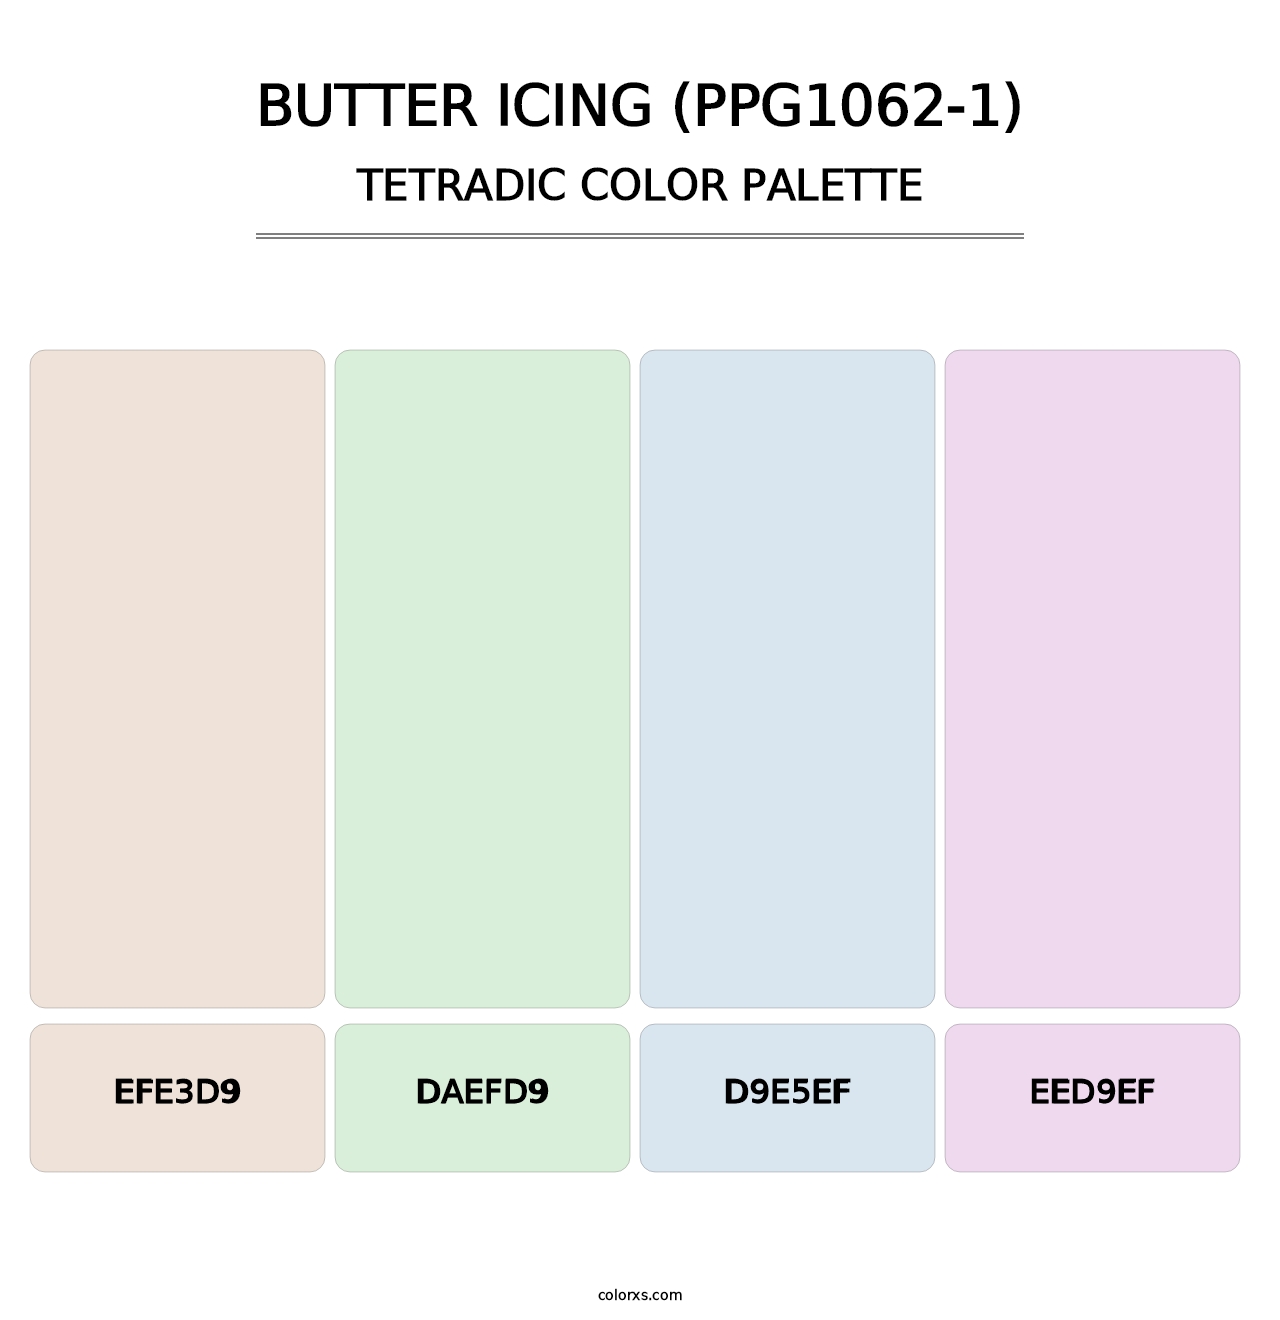 Butter Icing (PPG1062-1) - Tetradic Color Palette